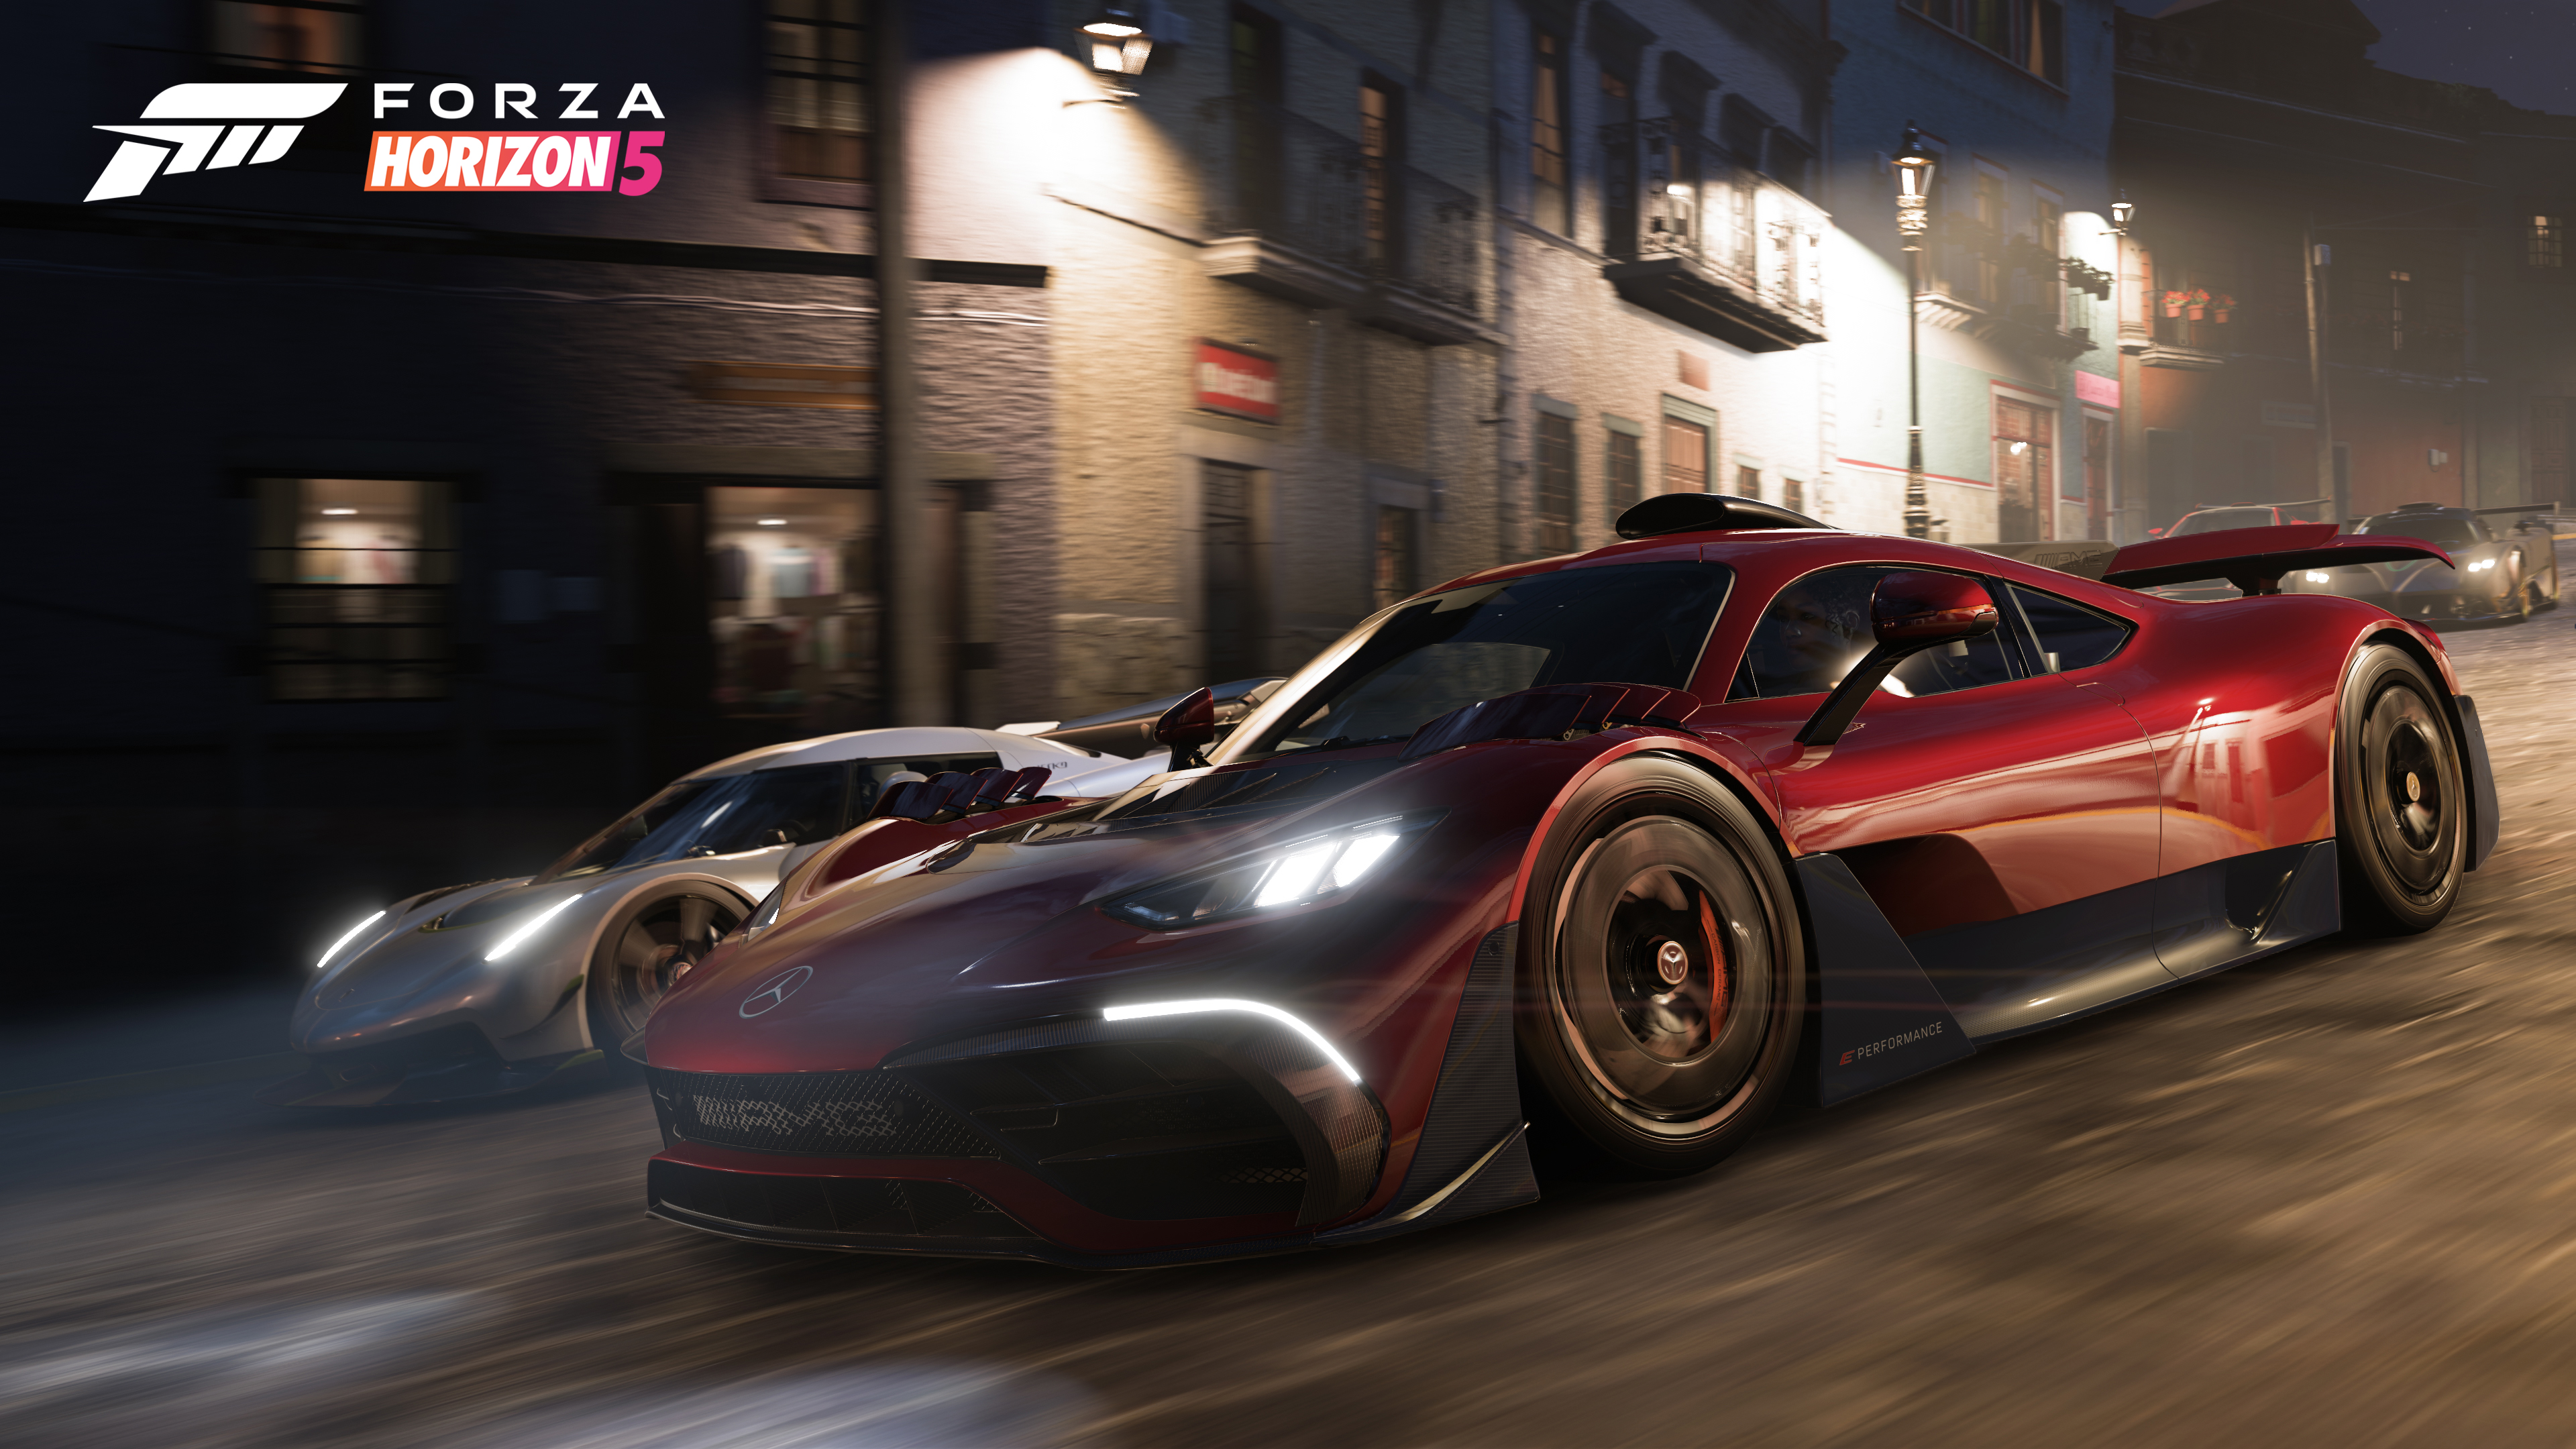 Forza Horizon 5 Unveils New Gameplay and Cover Cars at gamescom 2021